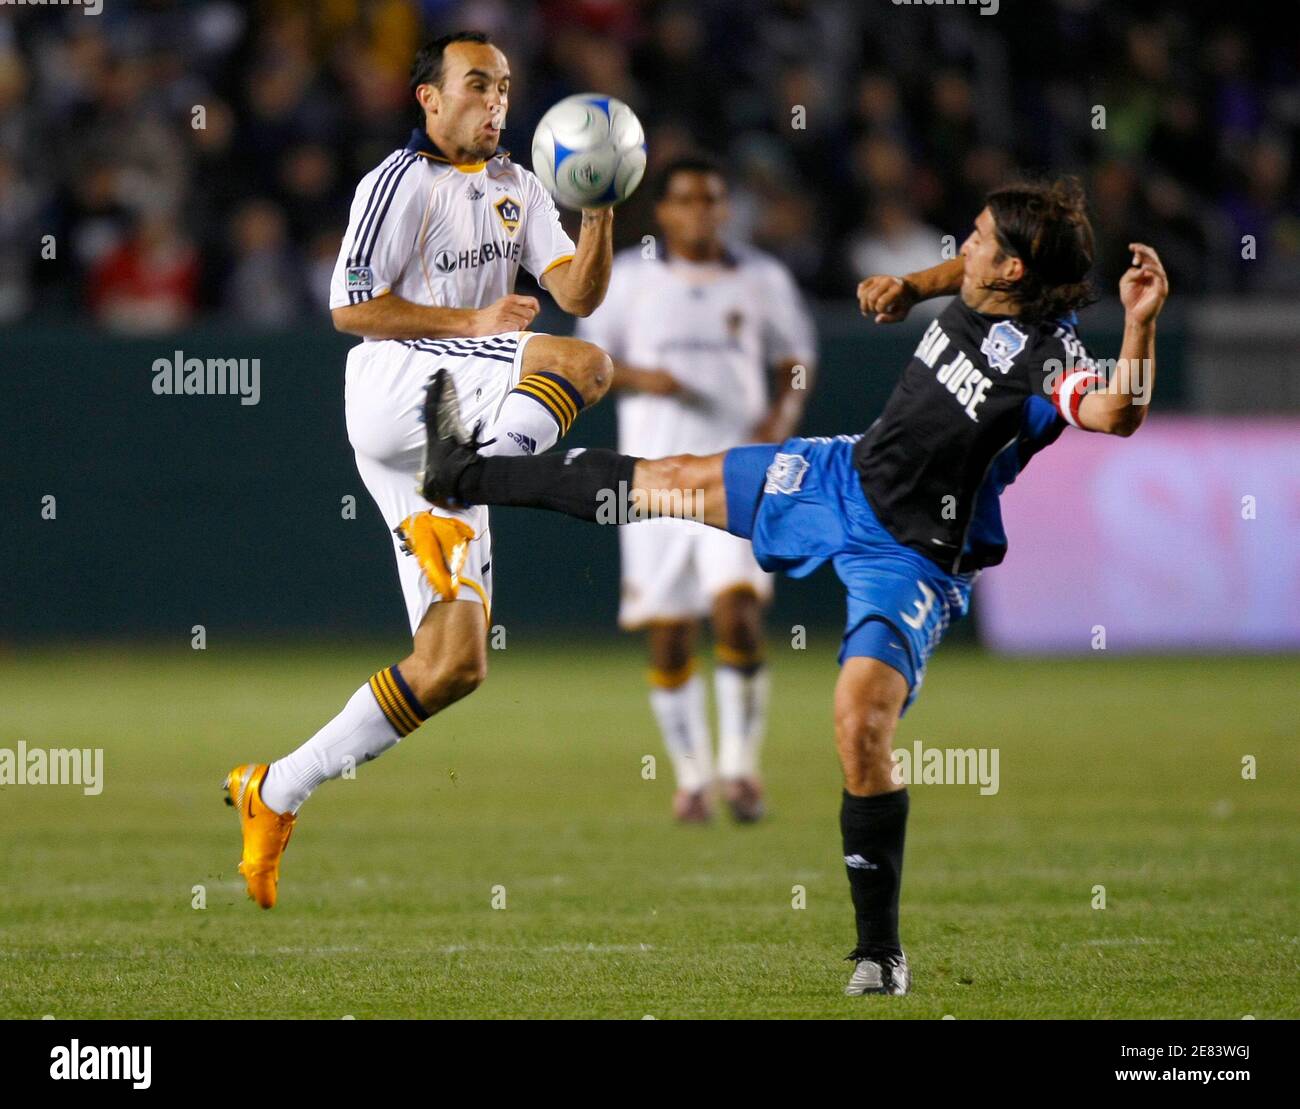 Los Angeles Galaxy's Landon Donovan (L) fights for the ball with San Jose Earthquakes' Nick Garcia during the opening season game of their Major League Soccer game in Carson, California  April 3, 2008.    REUTERS/Mike Blake      (UNITED STATES) Stock Photo